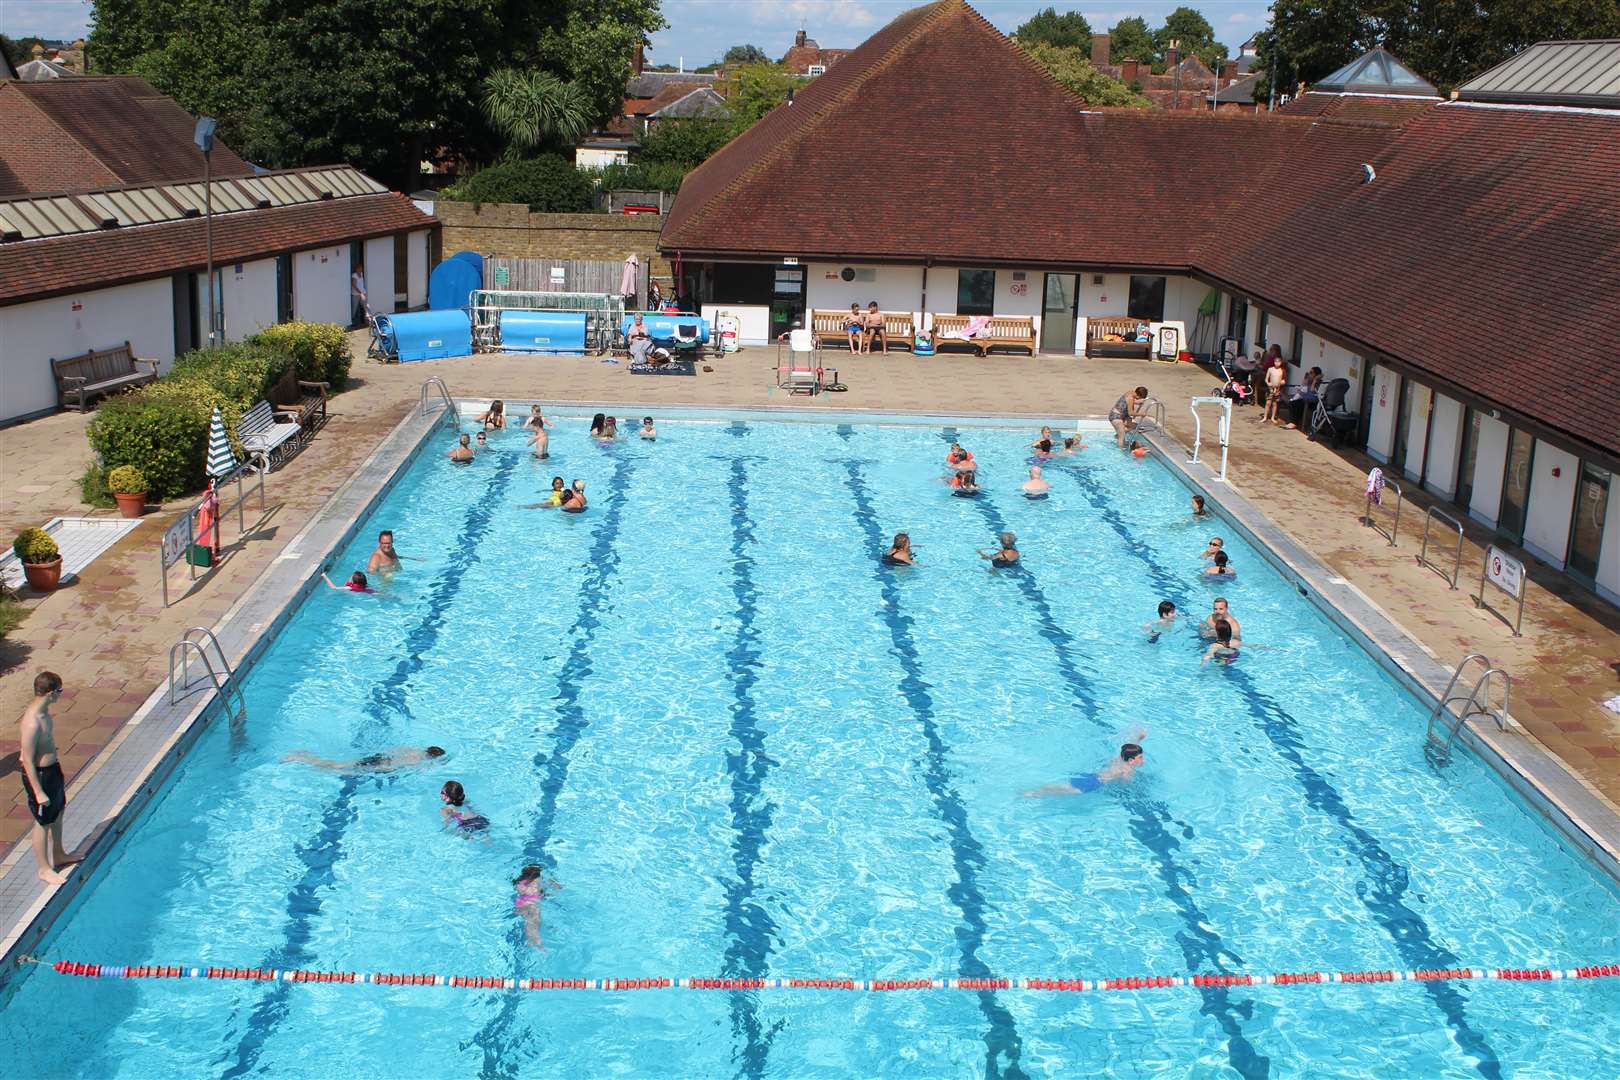 The outdoor pool at Faversham Picture: Poppy Boorman/Faversham Pools